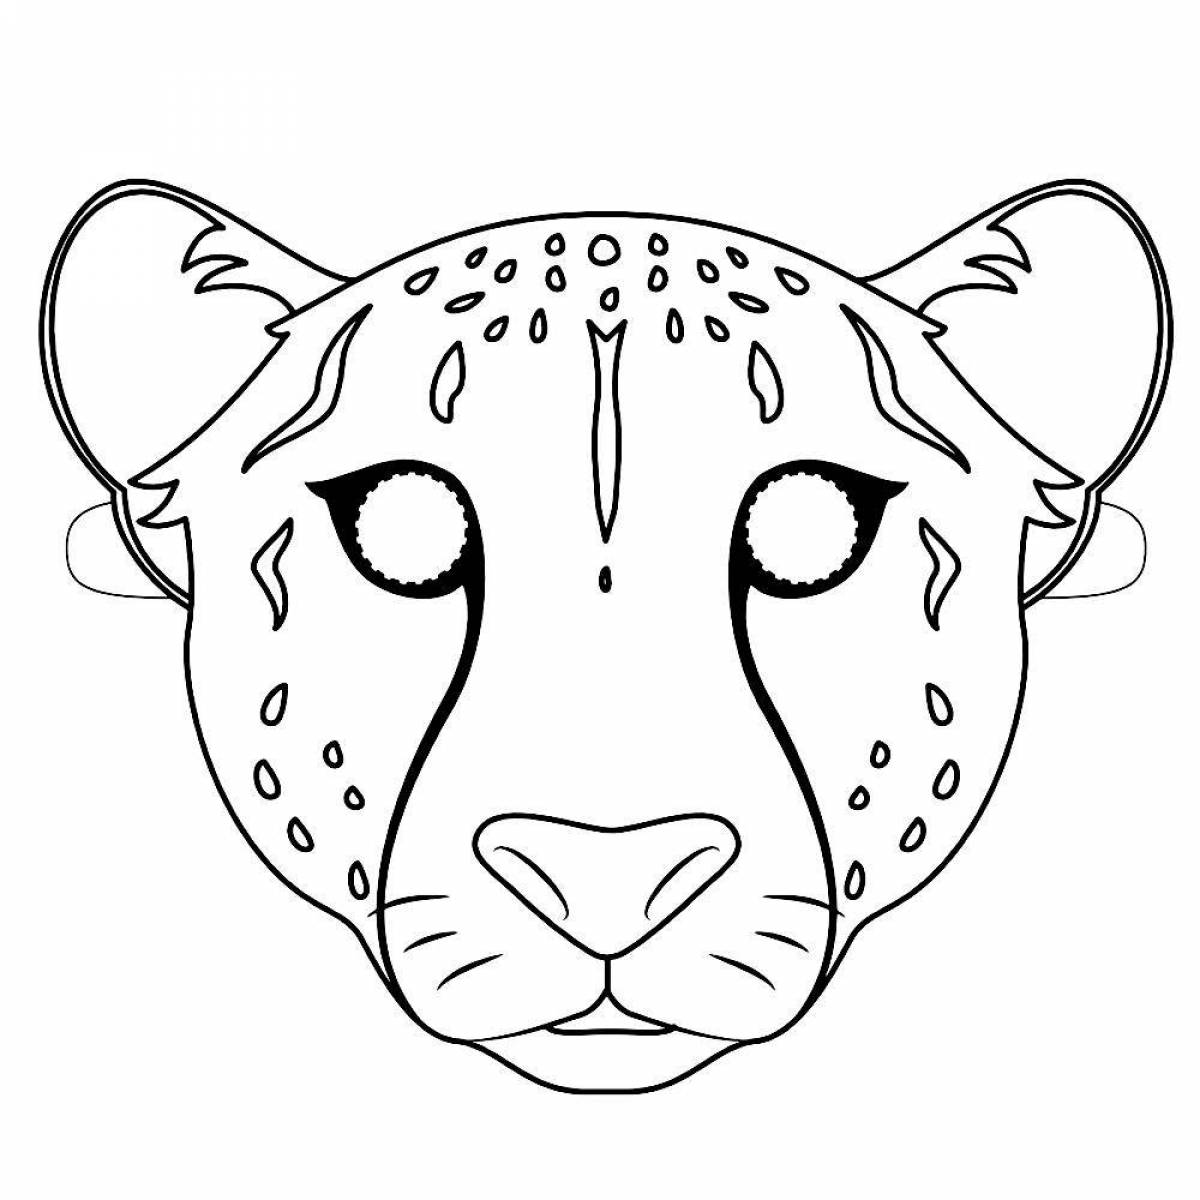 Coloring page animal mask for kids